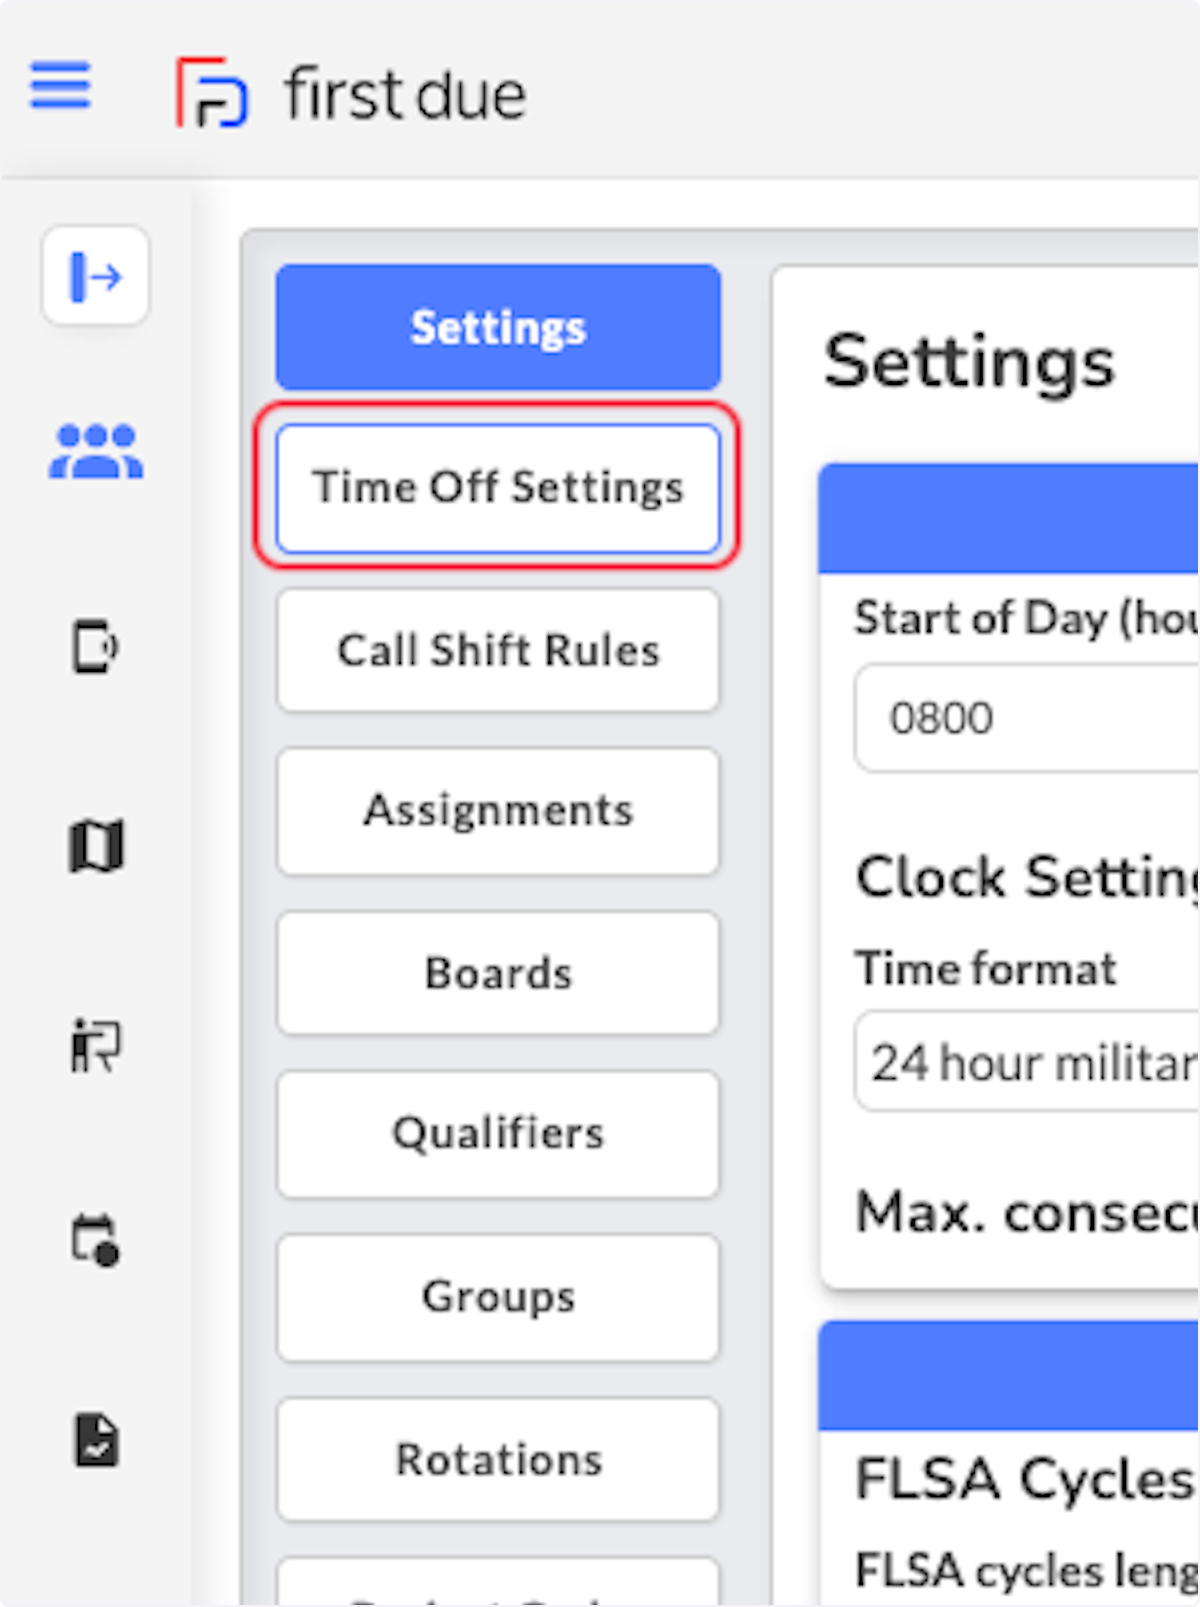 Click on Time Off Settings.